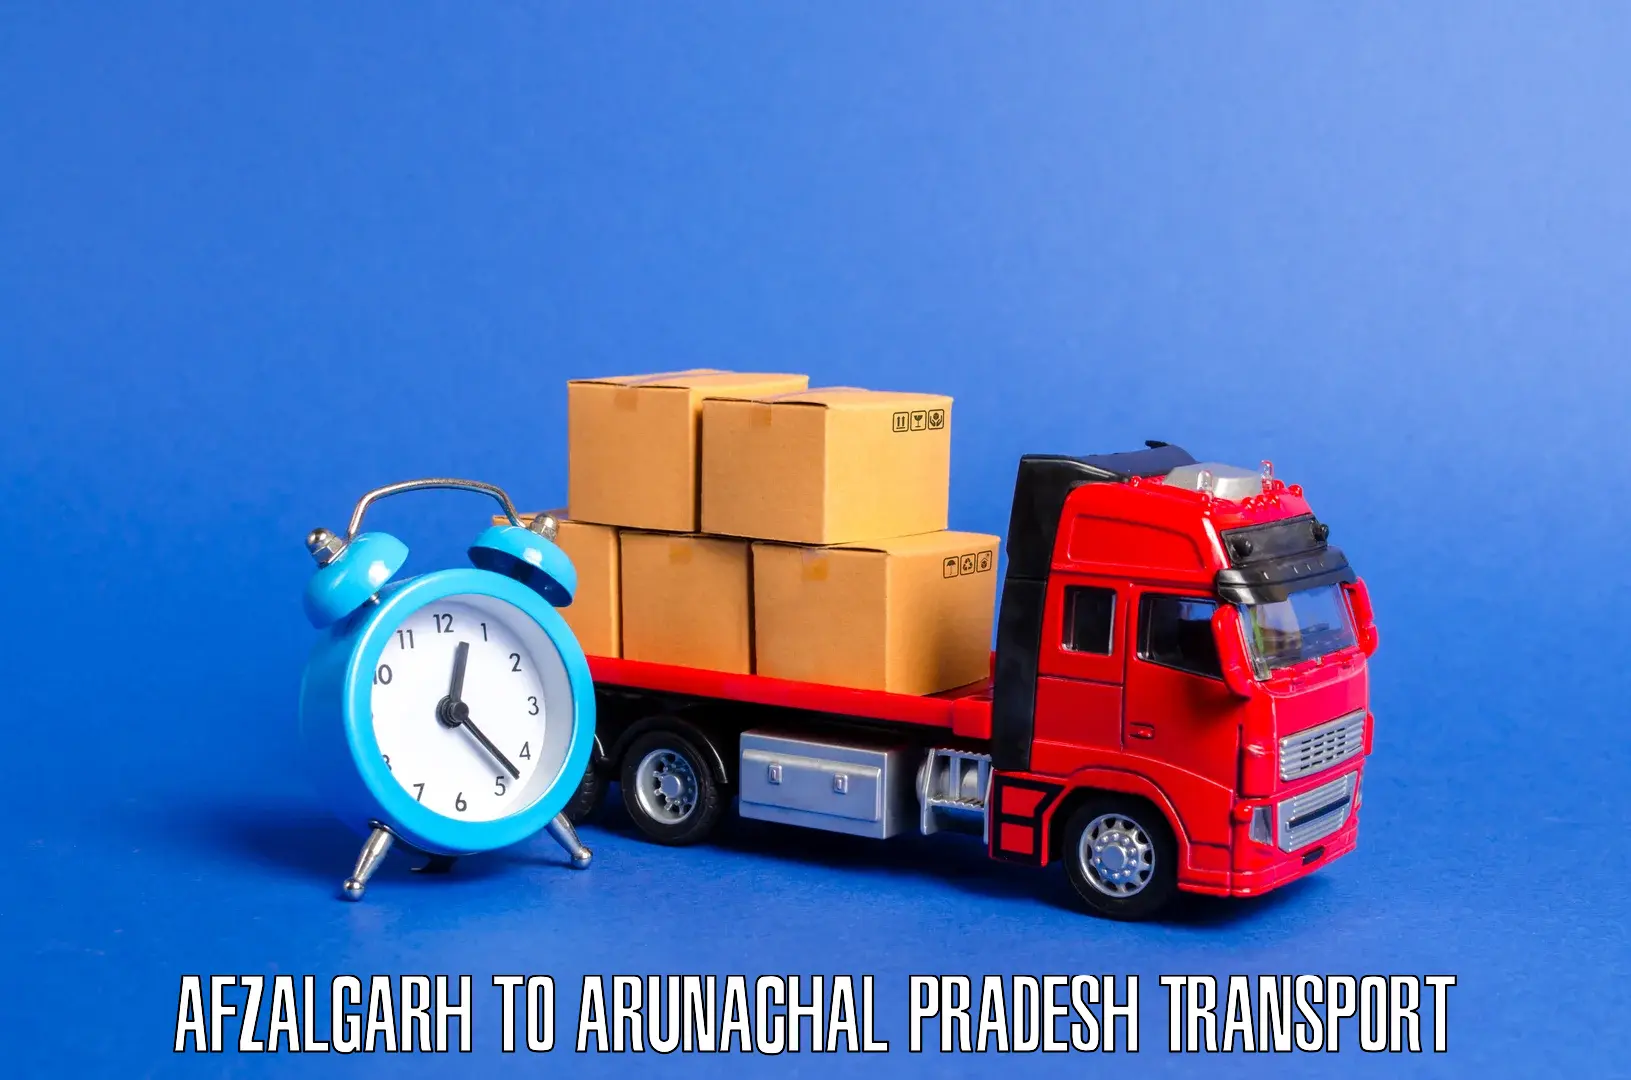 Shipping services Afzalgarh to Yingkiong